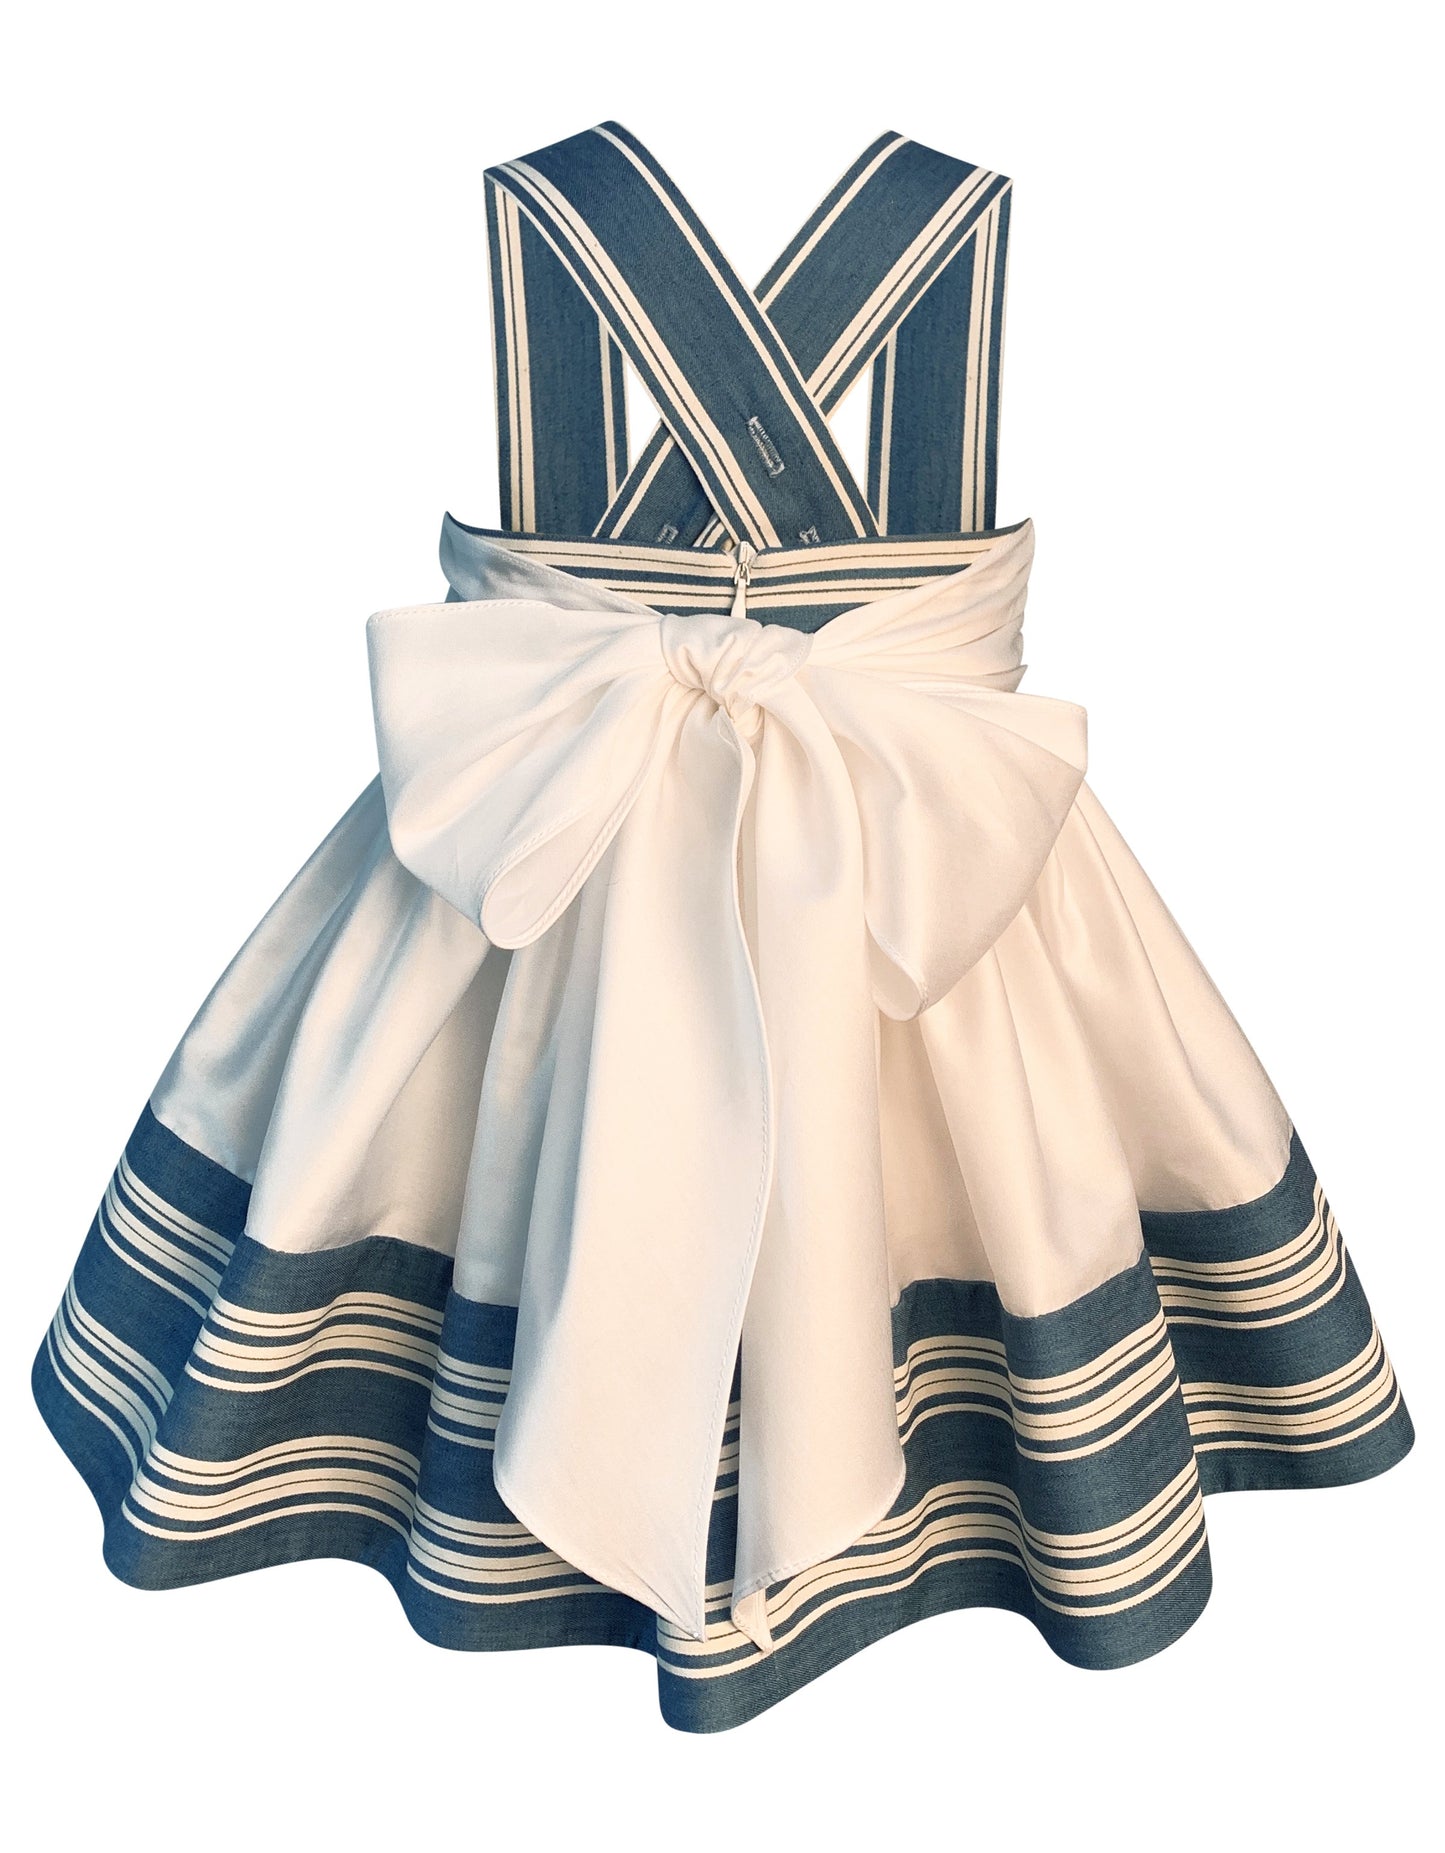 Helena and Harry Girl's Blue and White Striped Sundress